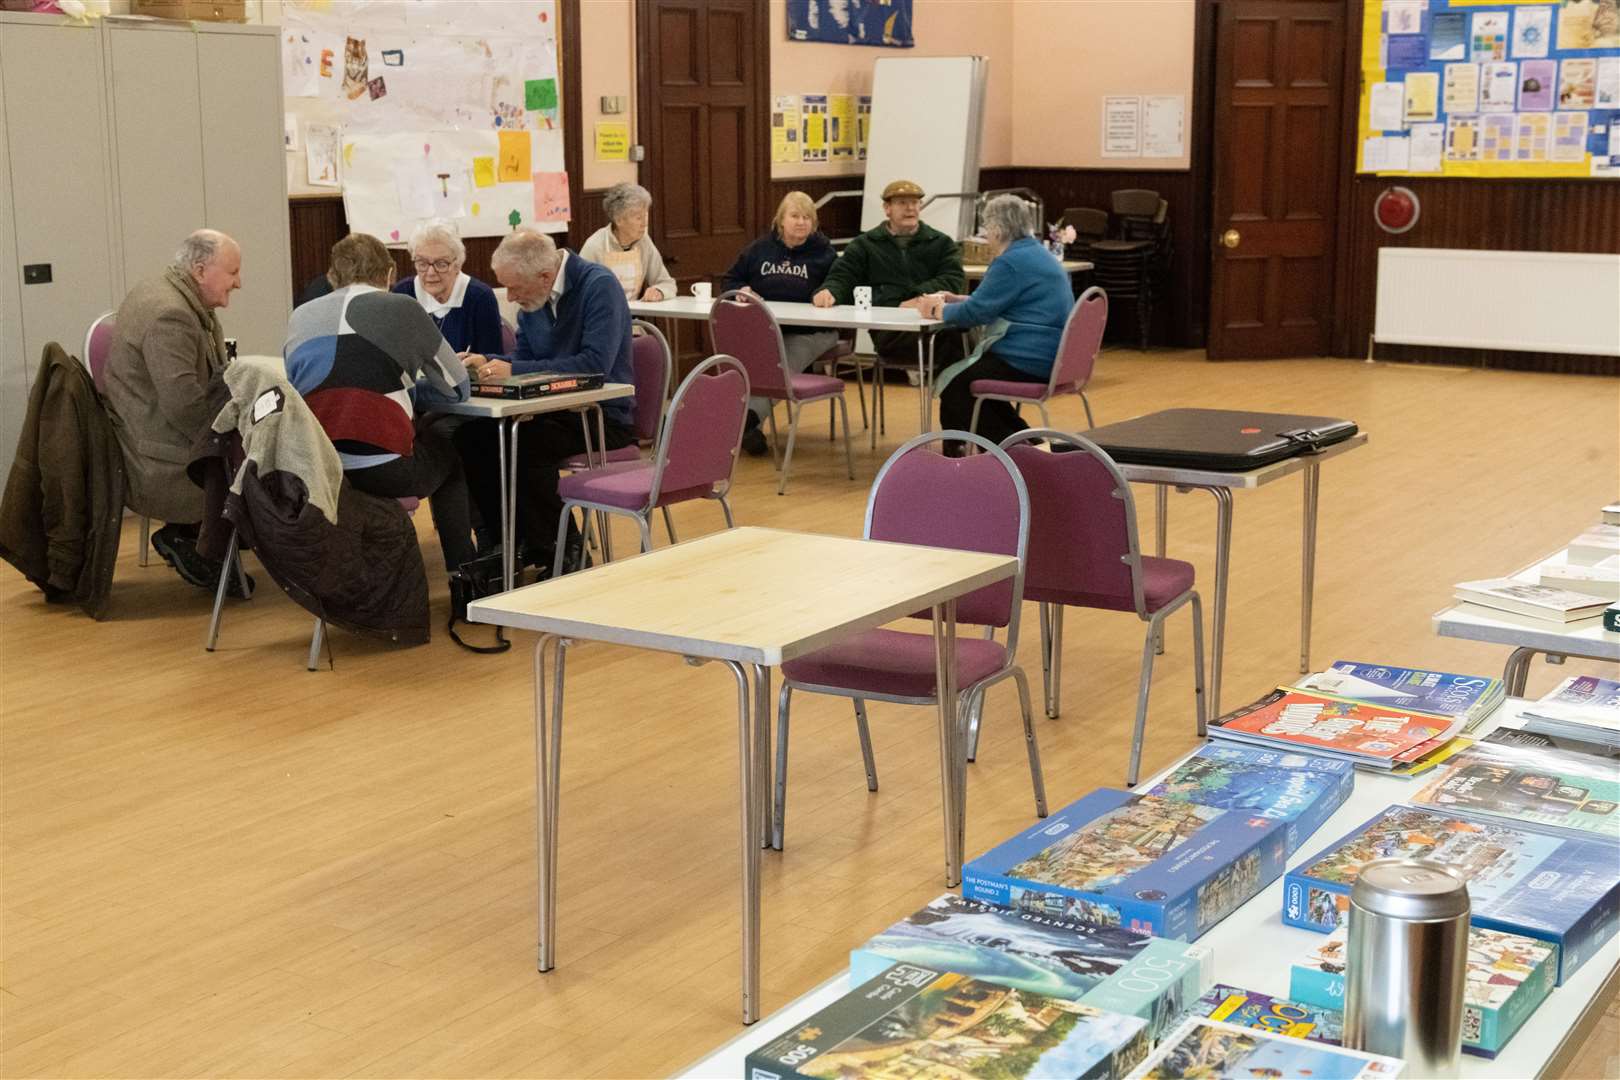 Playing board games in St Leonard’s church hall.